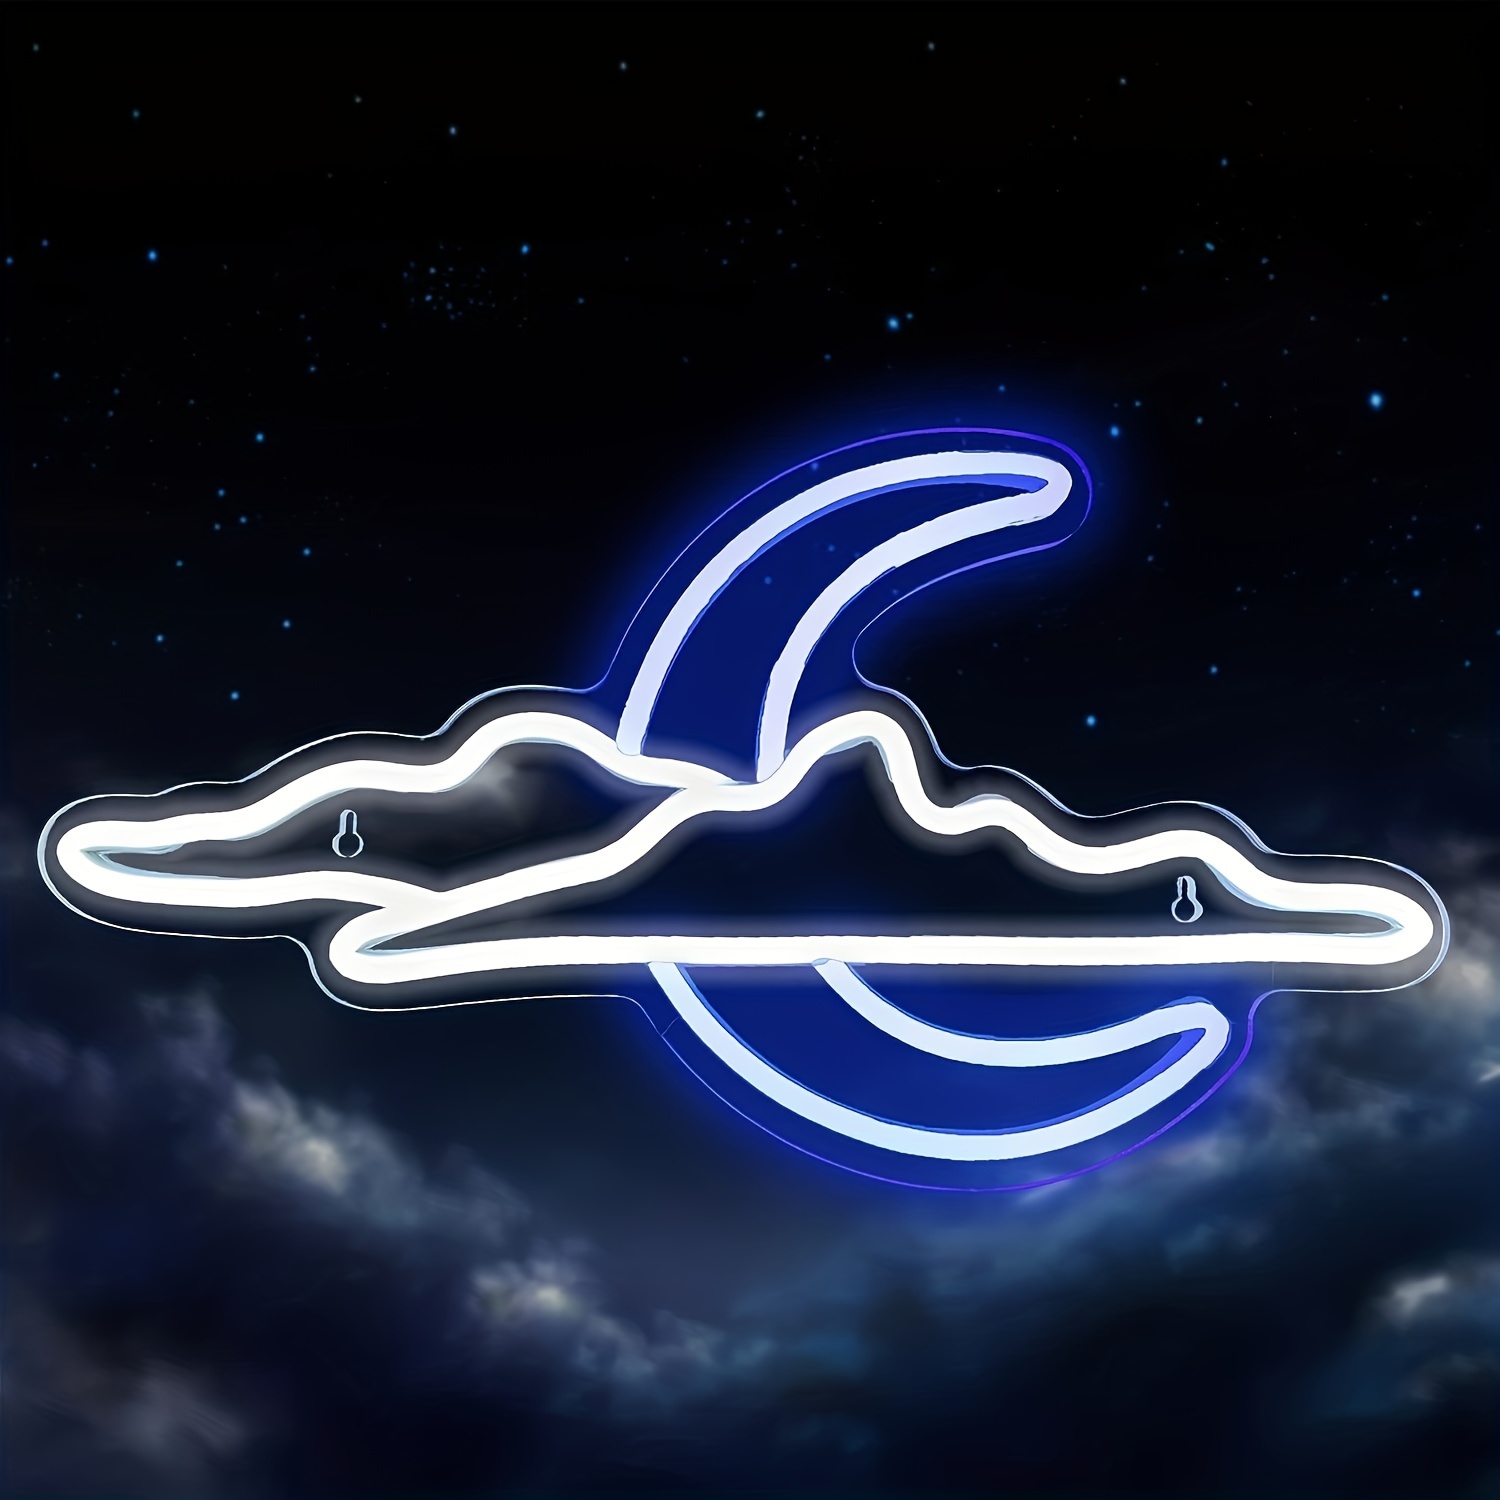 

1pc Cloud And Moon Neon Sign Wall Decor, Led Neon Light, For Bedroom, Girls, Wedding, Party, Bar, Christmas Night Light Decoration, Usb Powered Blue And White Neon Sign